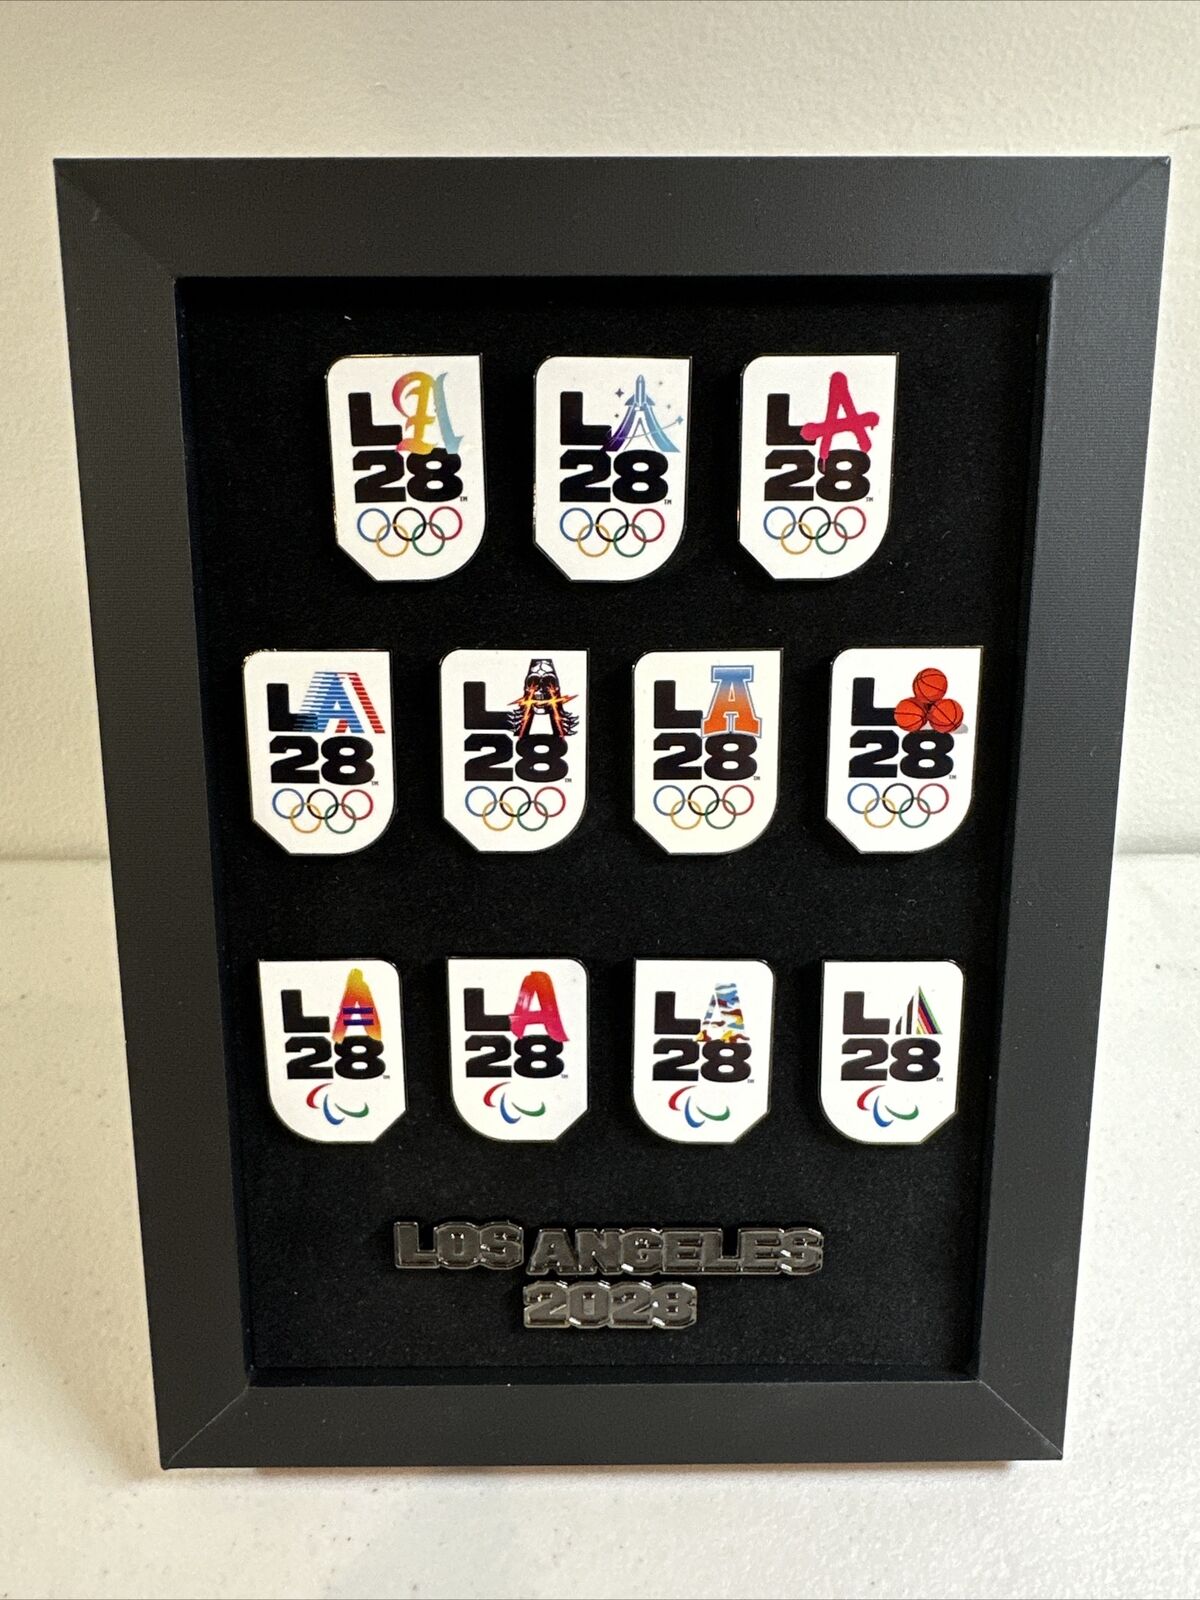 LA 2028 Summer Olympics Pin Set 11 pins with Frame - Very Rare Los Angeles